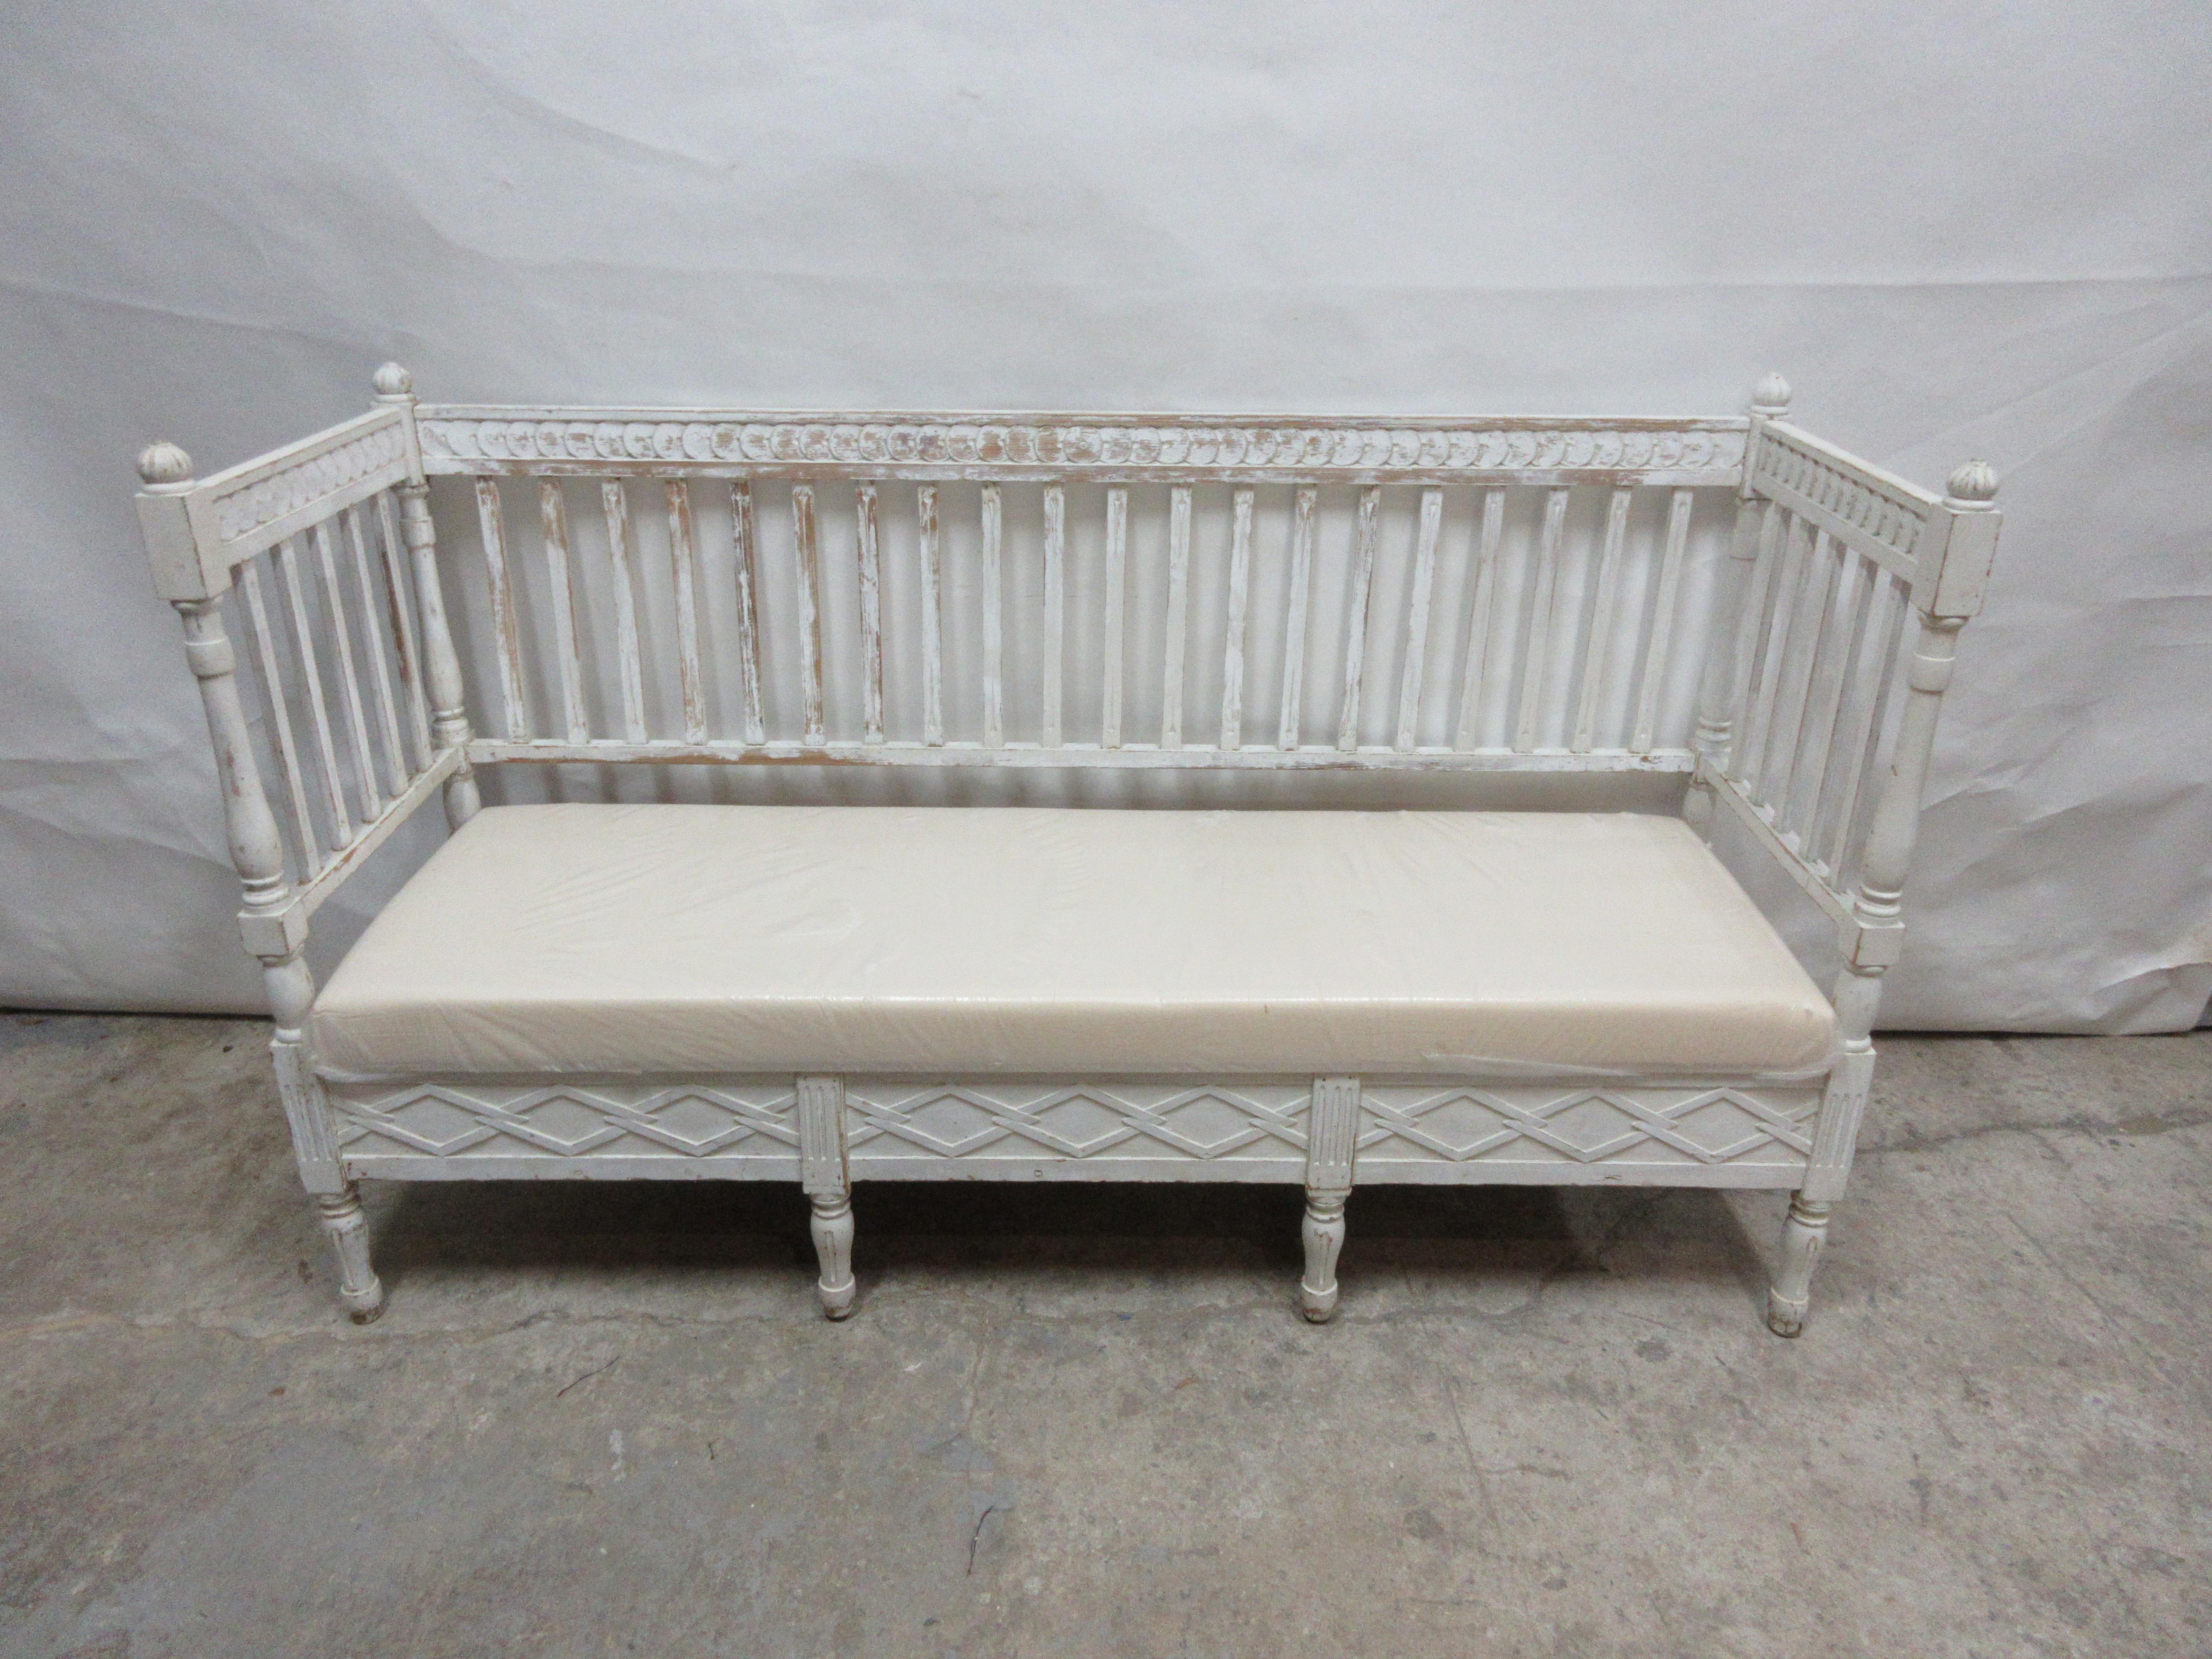 This is a 100% original painted Swedish Gustavian sofa. It has new cushion seating covered in Muslin. This sofa was found at an Auction in Mora, Sweden.